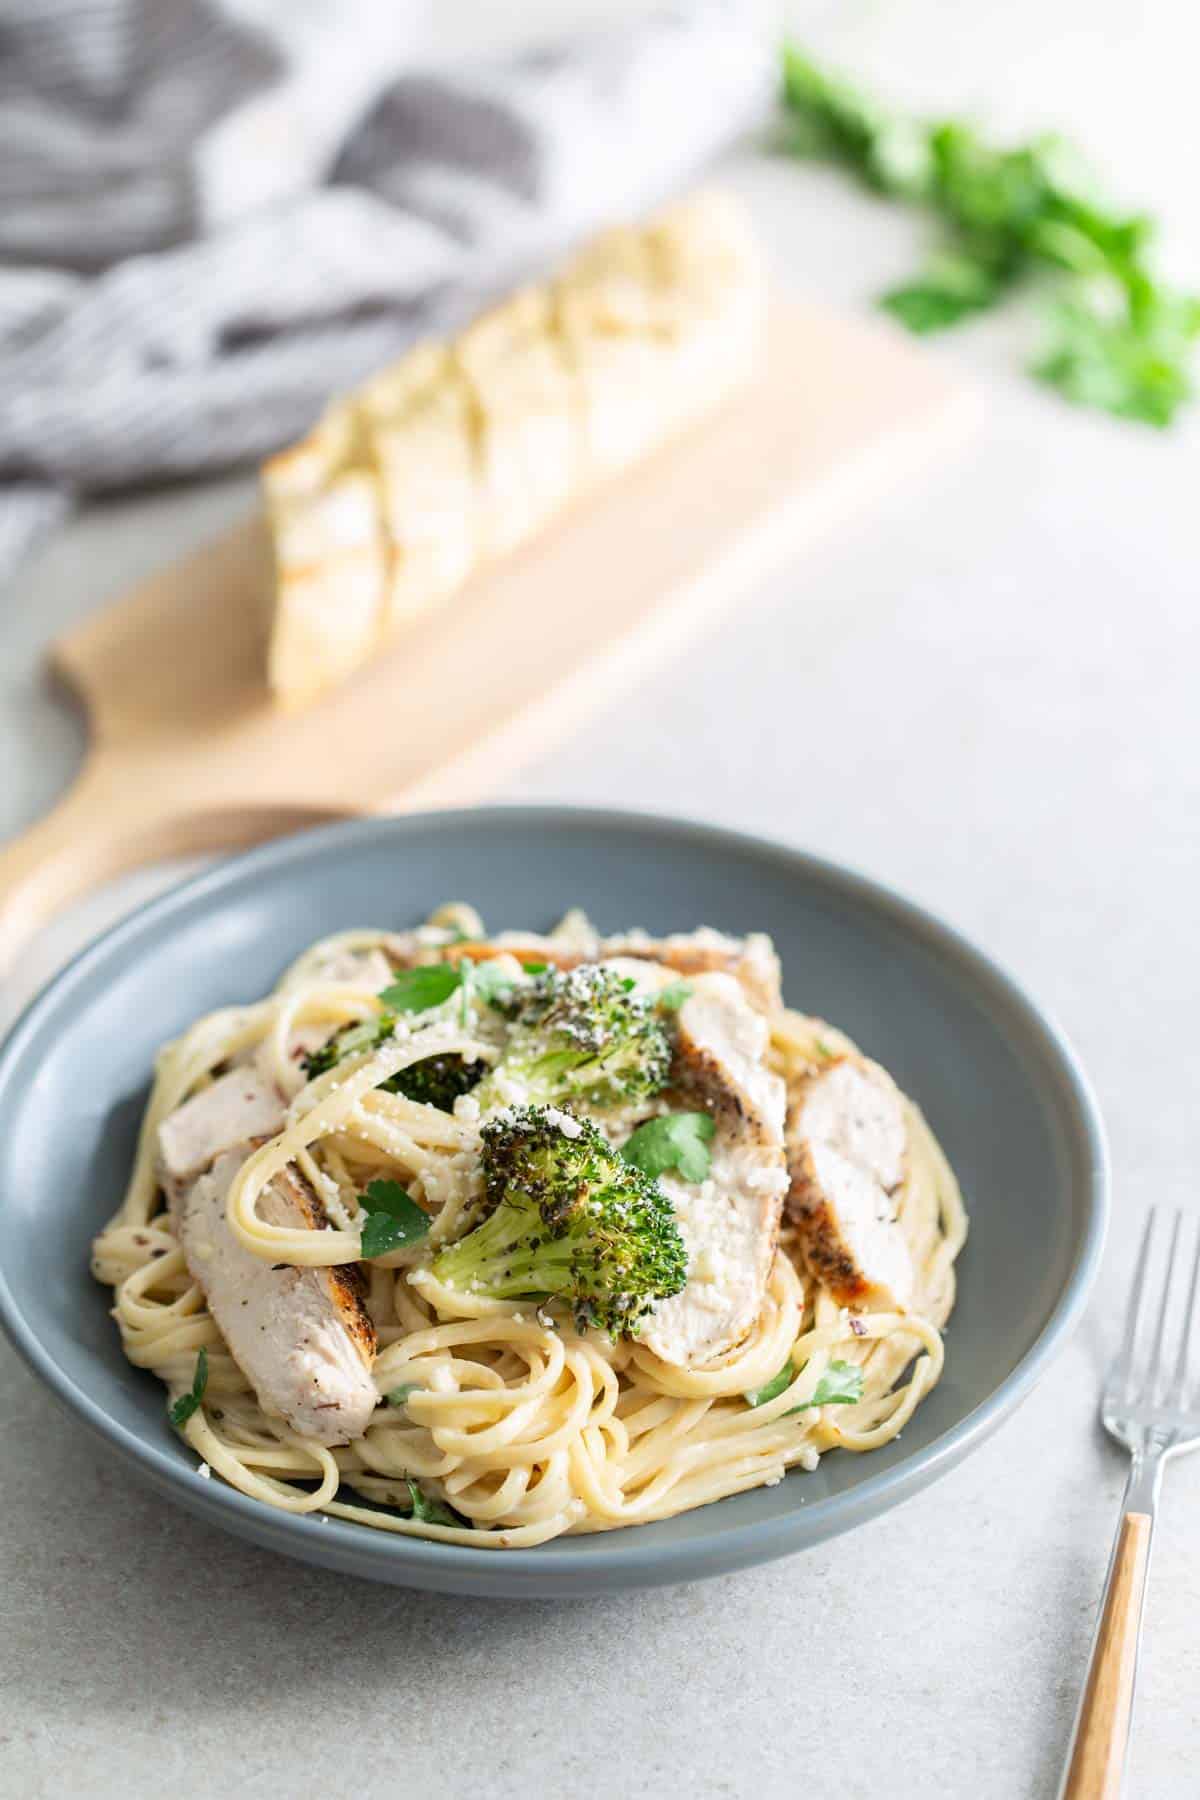 A plate of pasta with chicken and broccoli.